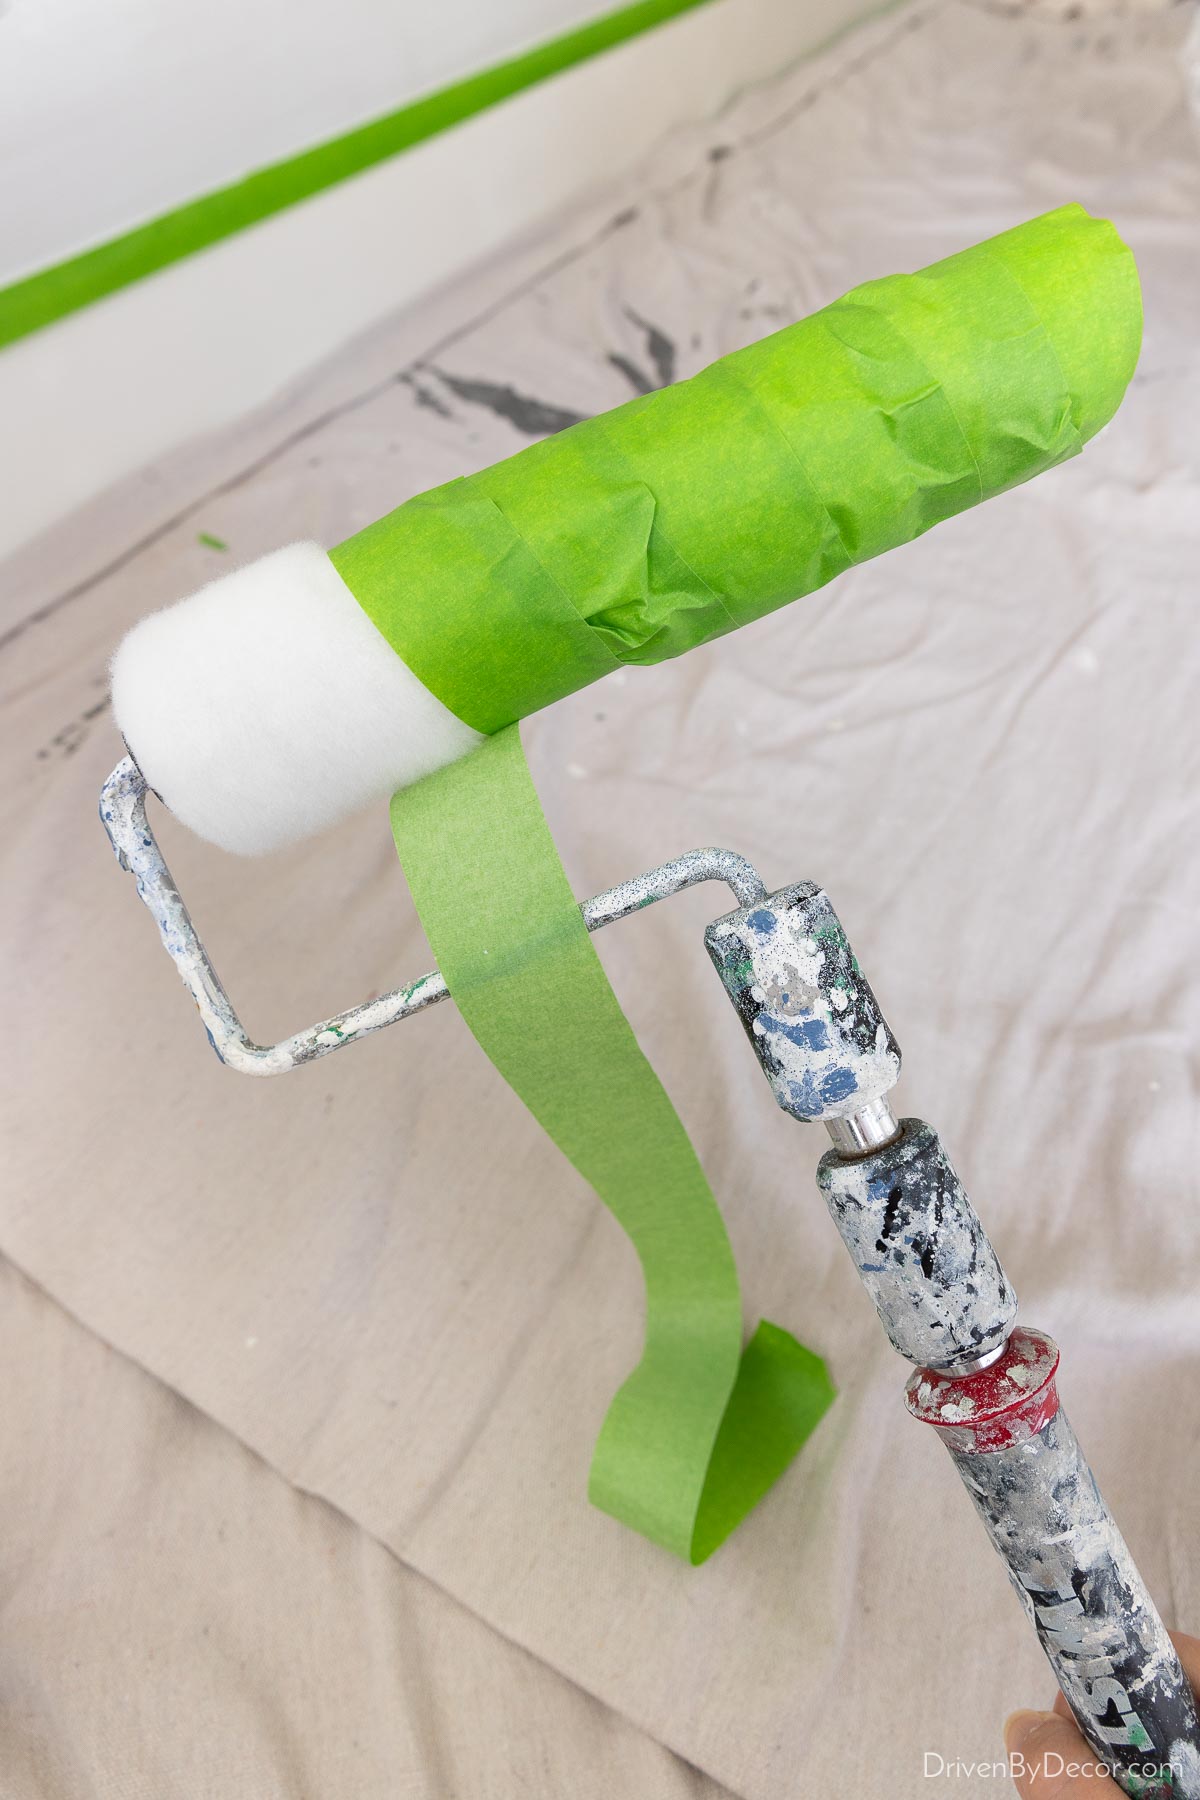 A simple way to prep your roller for painting